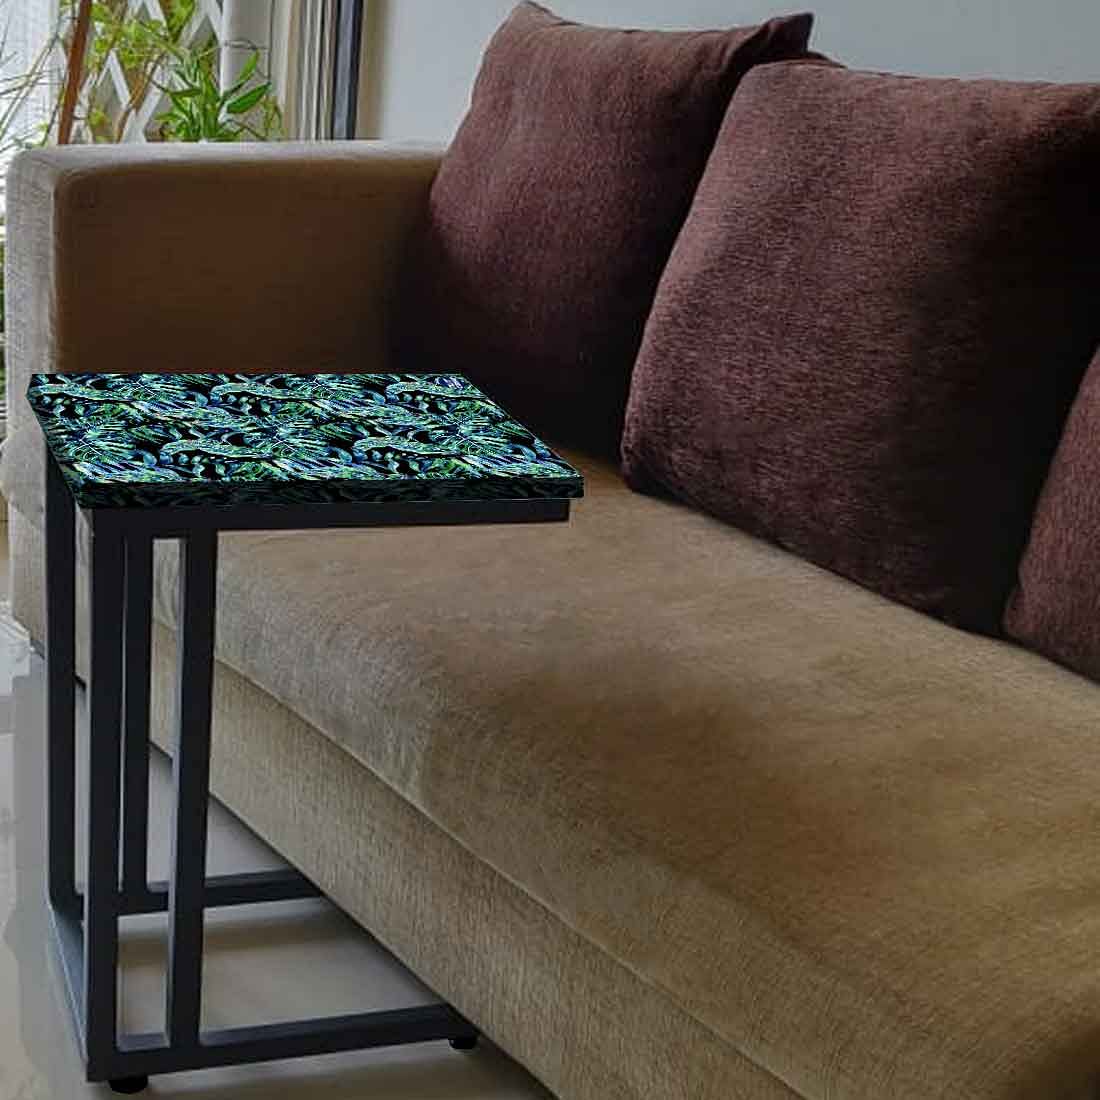 C Shaped End Table For Sofa - Dark Green Tropical Nutcase